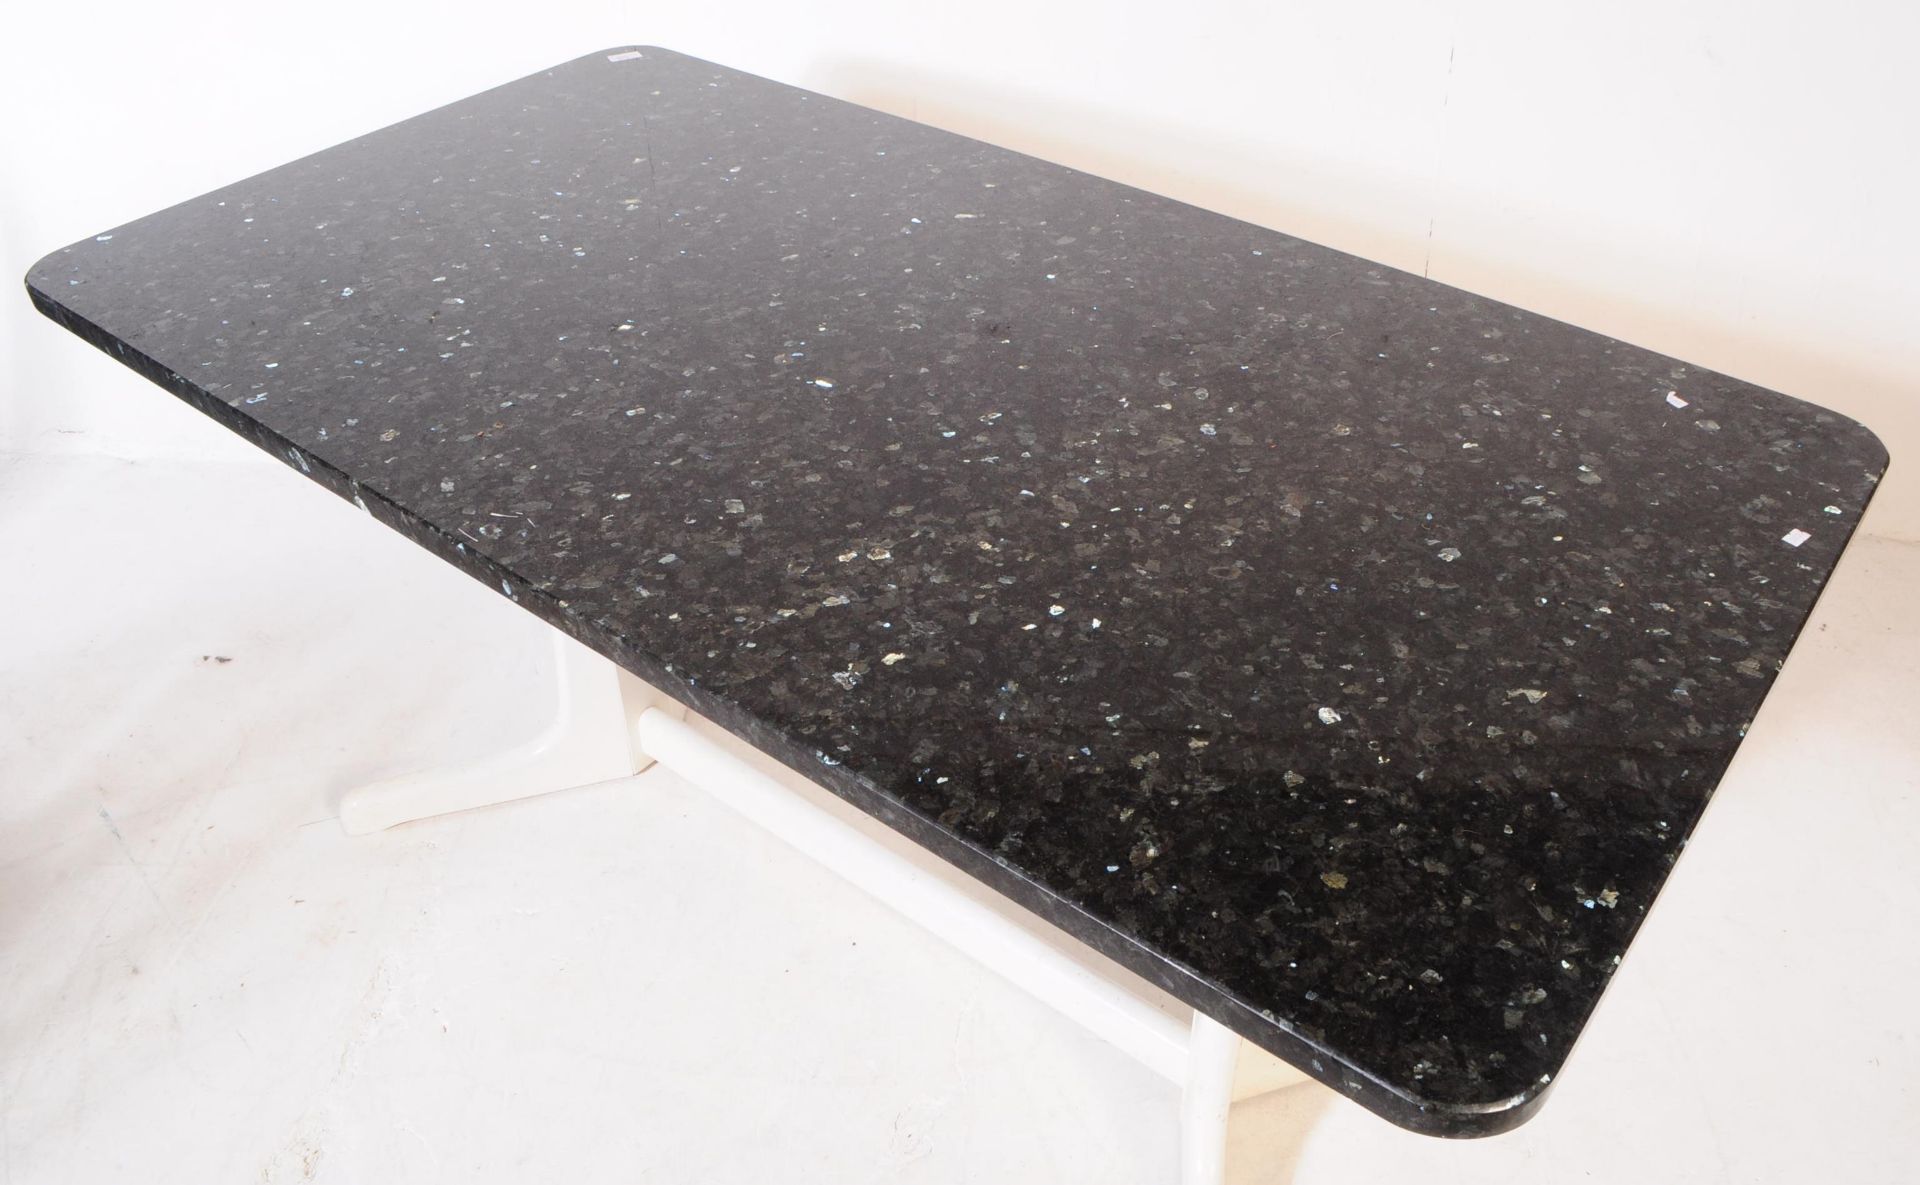 BRITISH MODERN DESIGN - GRANITE TOP DINING TABLE W/ CHAIRS - Image 3 of 8